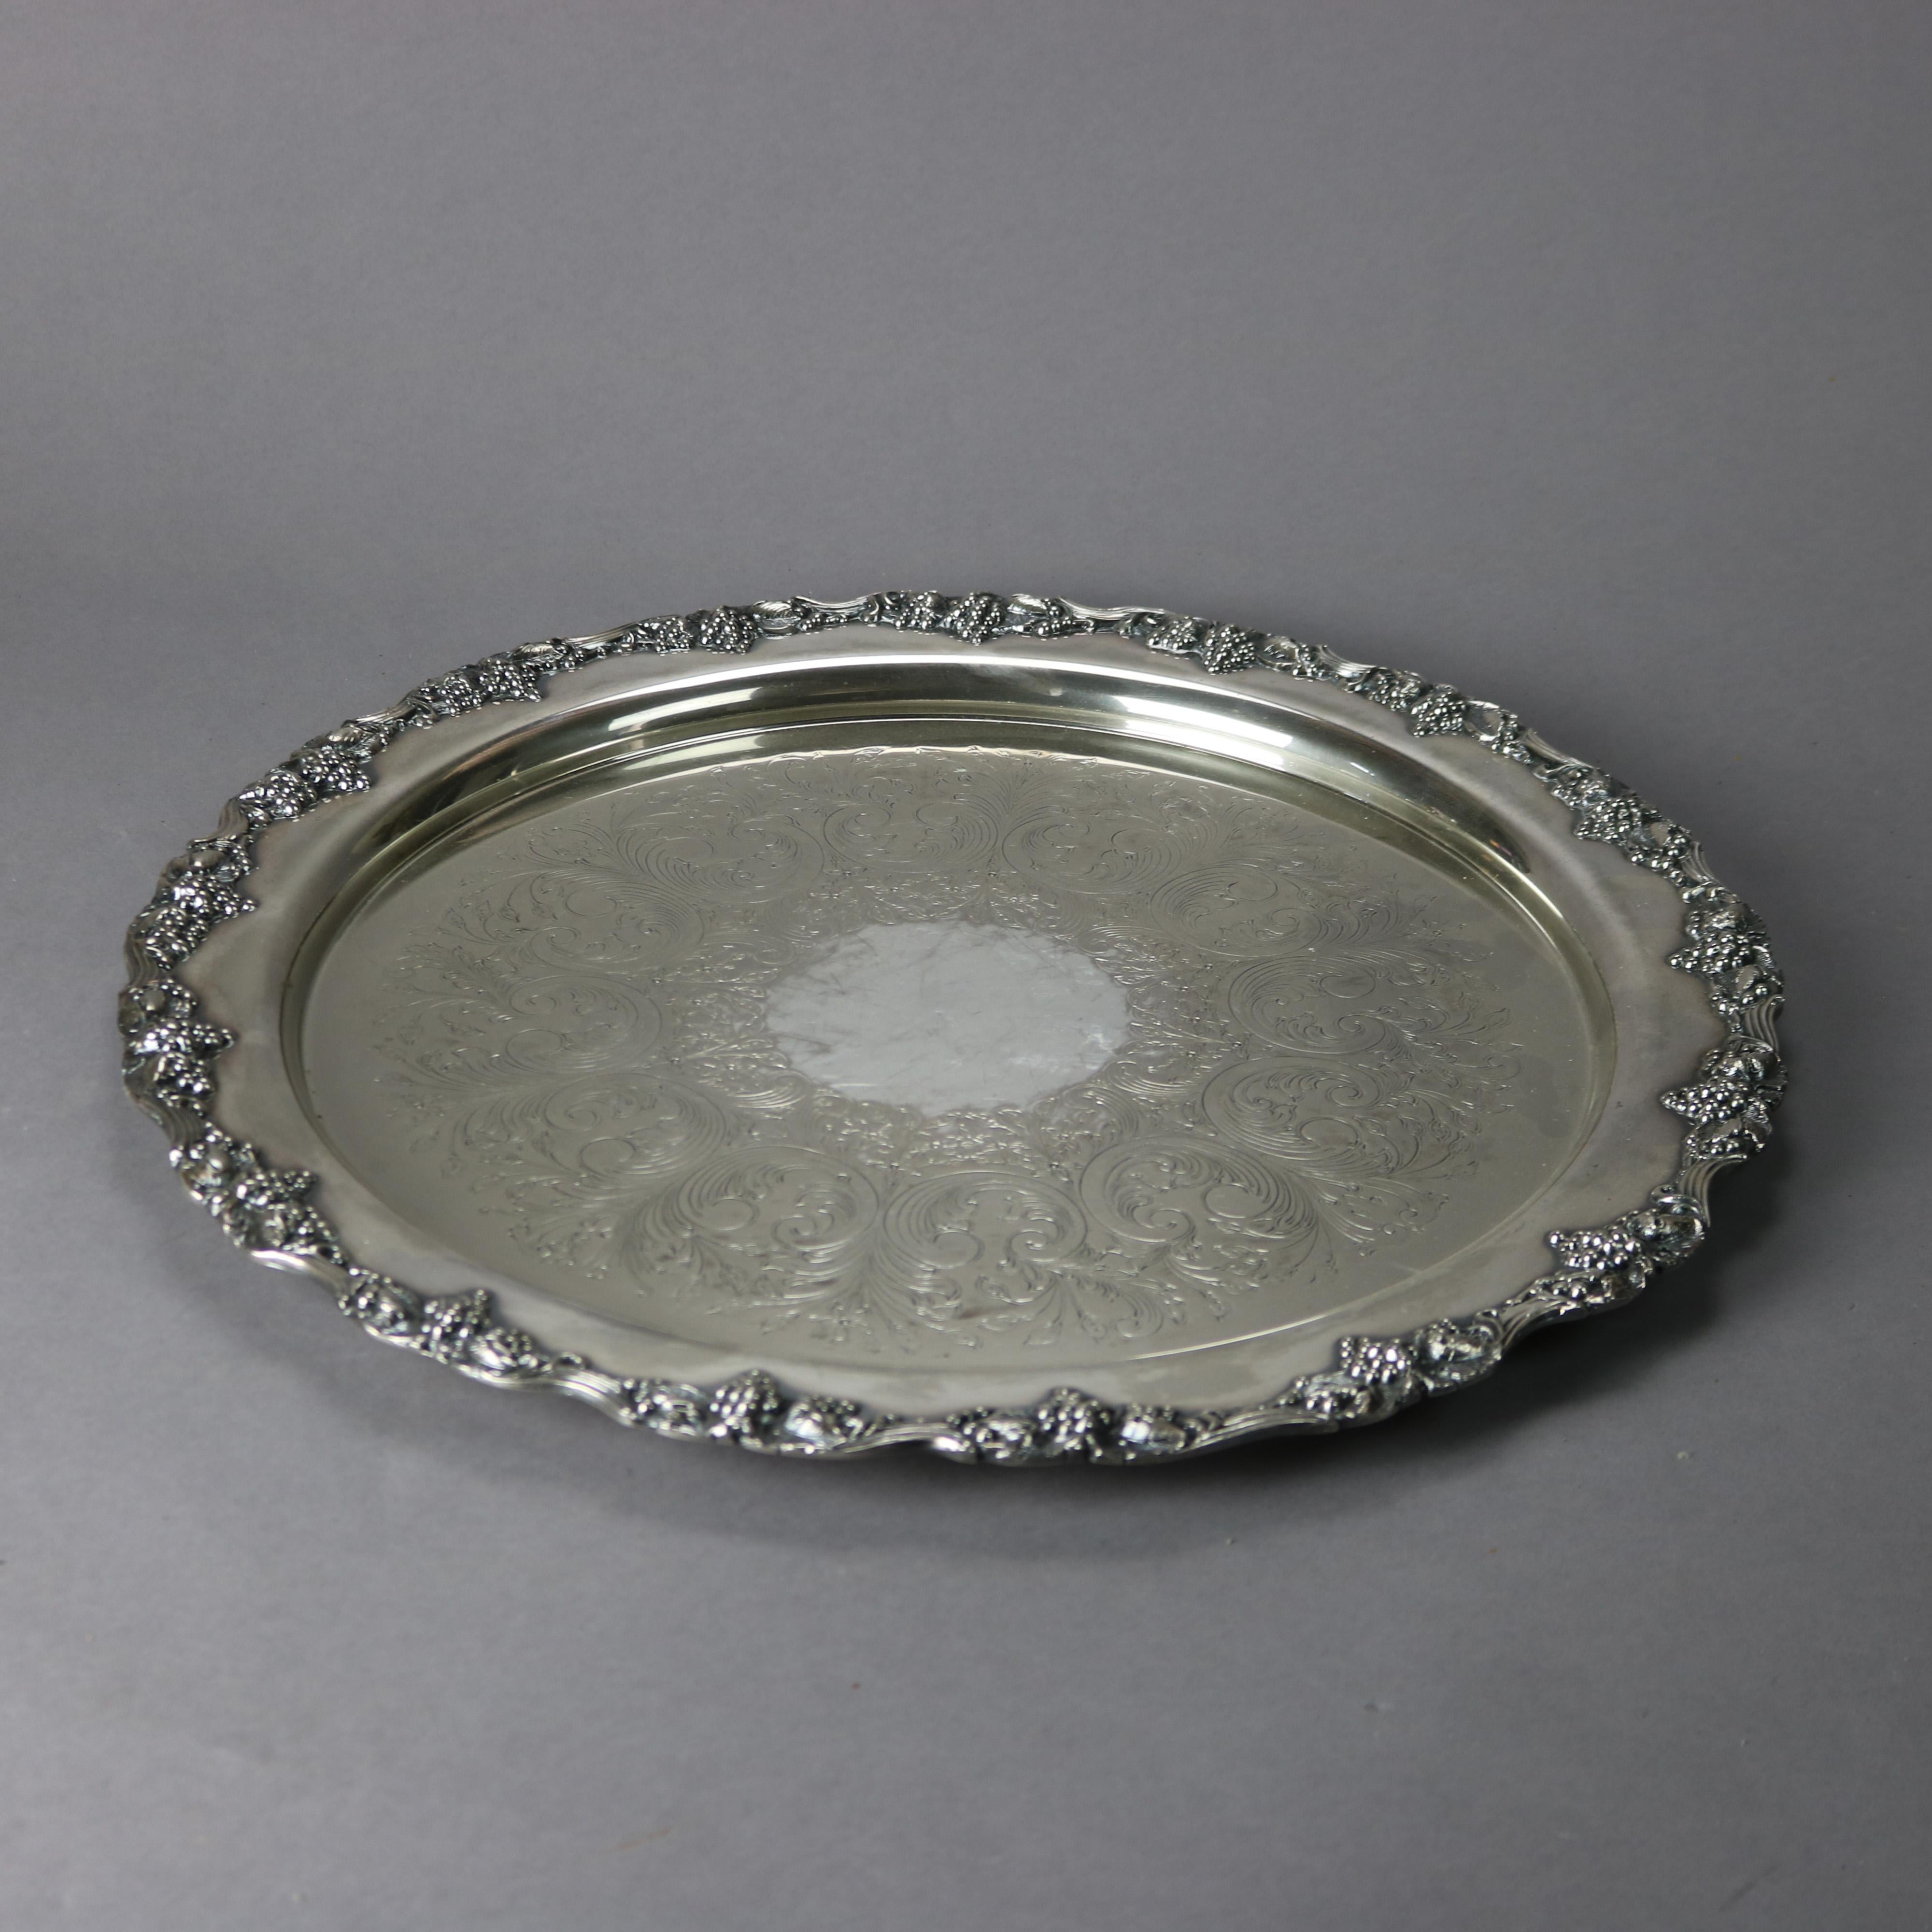 Antique Silver Plate Punch Bowl, Ladle & Tray Liner, Sheriden Taunton Sil 5